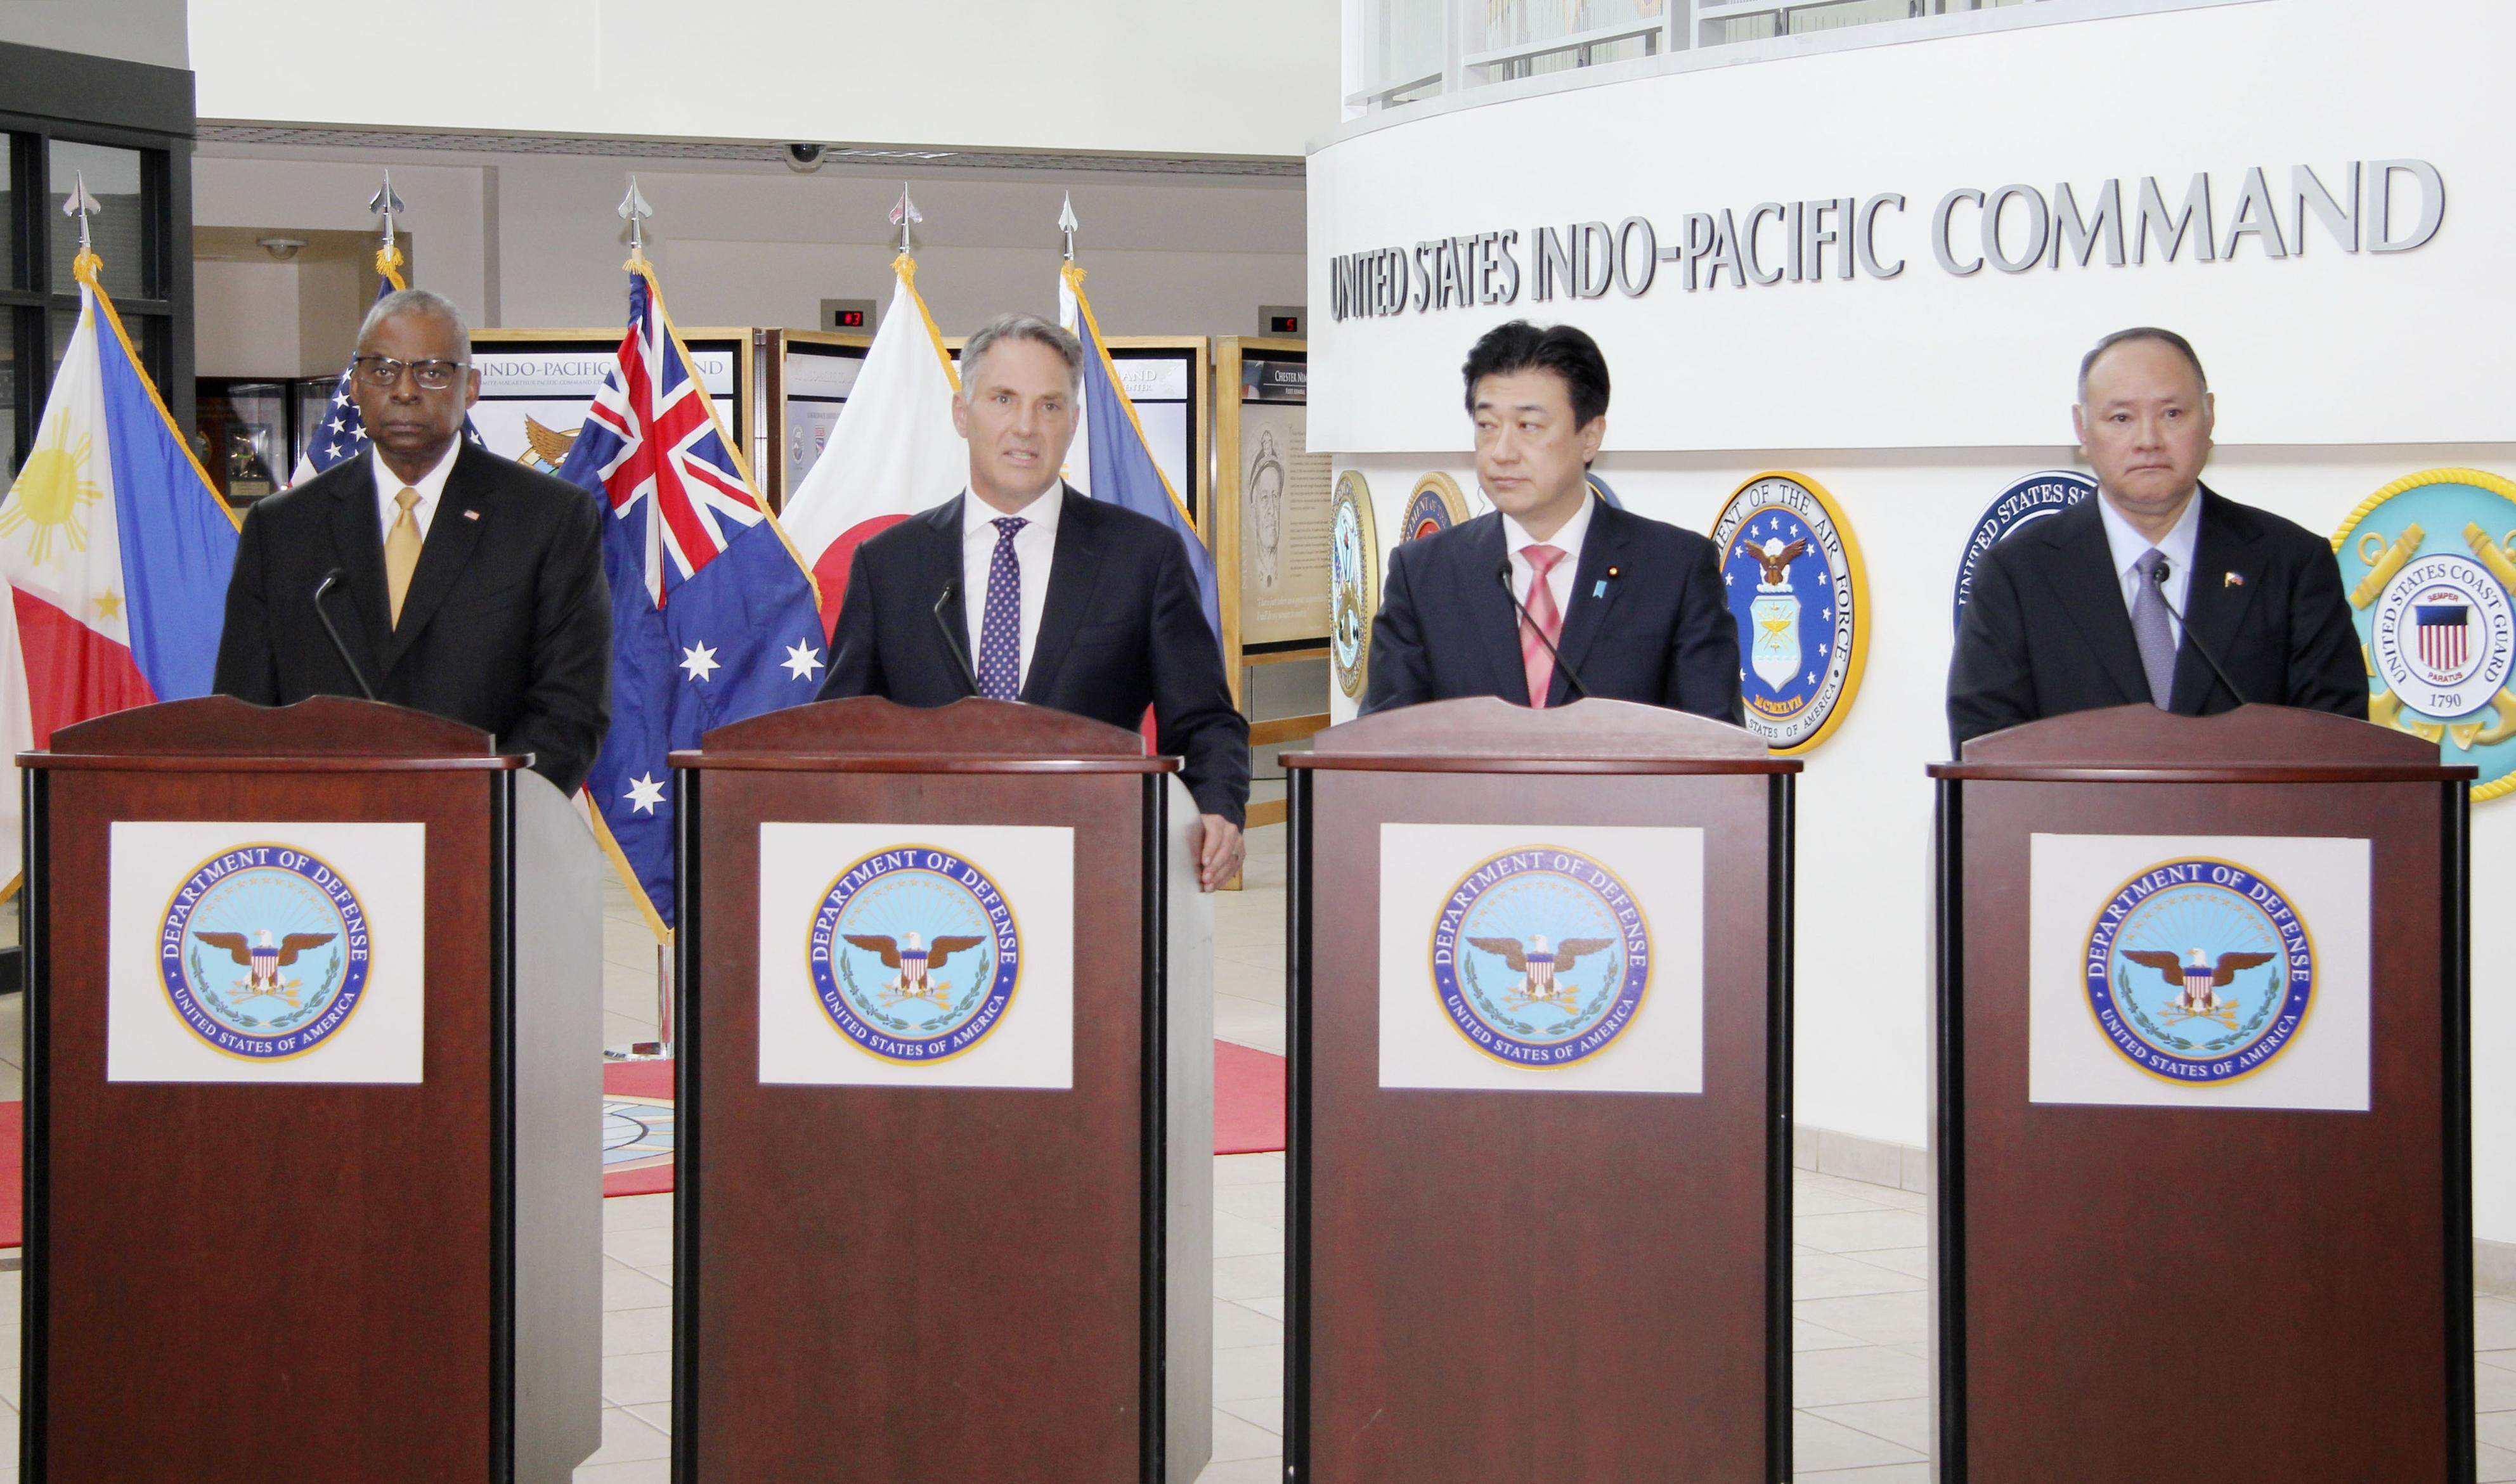 (From left) US Defence Secretary Lloyd Austin, Australian Defence Minister Richard Marles, Japanese Defence Minister Minoru Kihara and Philippine Defence Secretary Gilberto Teodoro hold a joint press conference following their talks in Hawaii on May 2. Photo: Kyodo